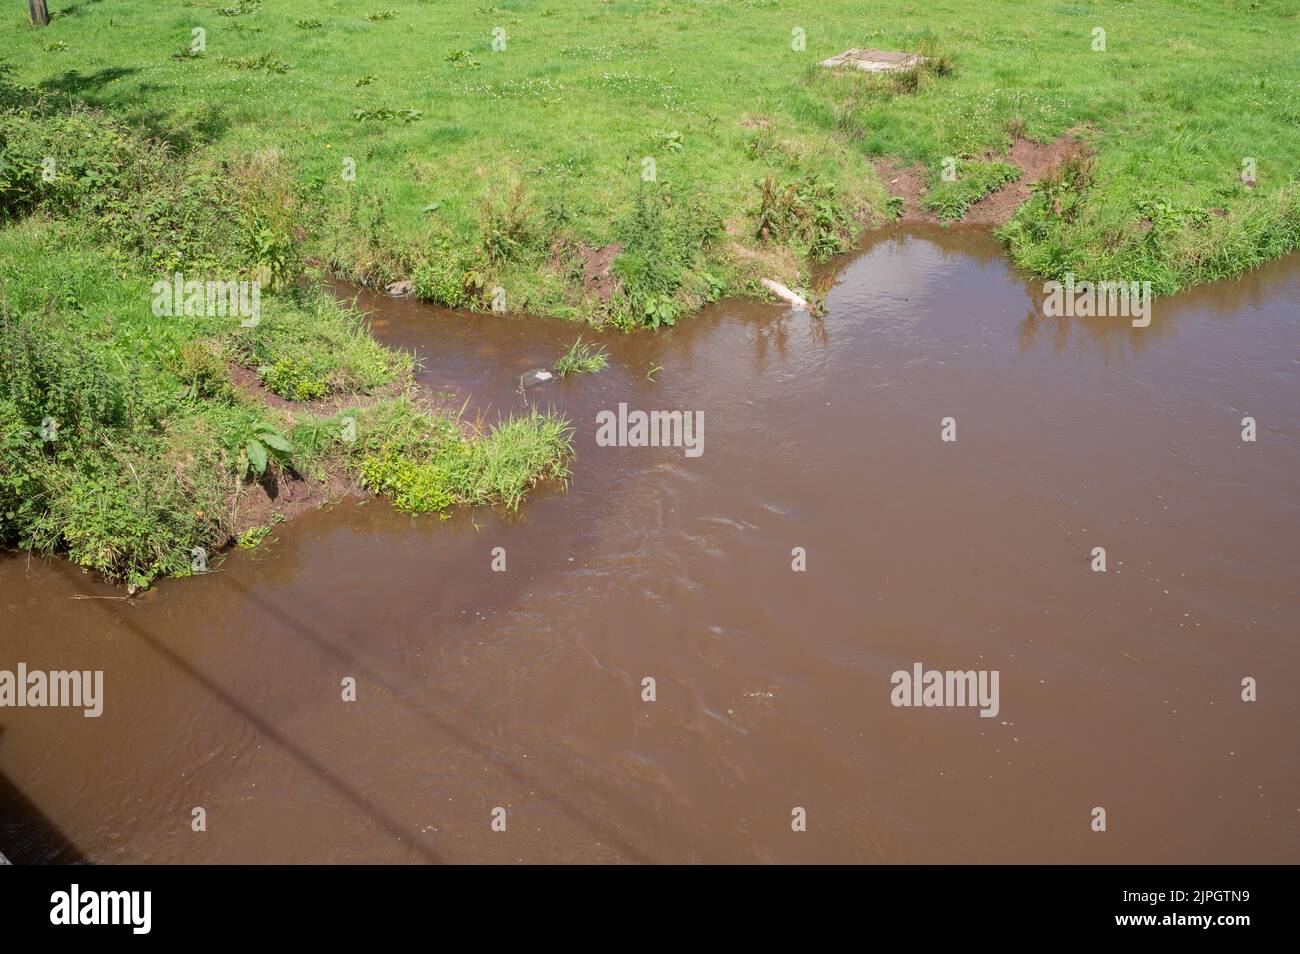 A tributary polluted with farm ellfluent discharges dark brown water into the already silt and effluent laden Gwendraeth Fach river Stock Photo